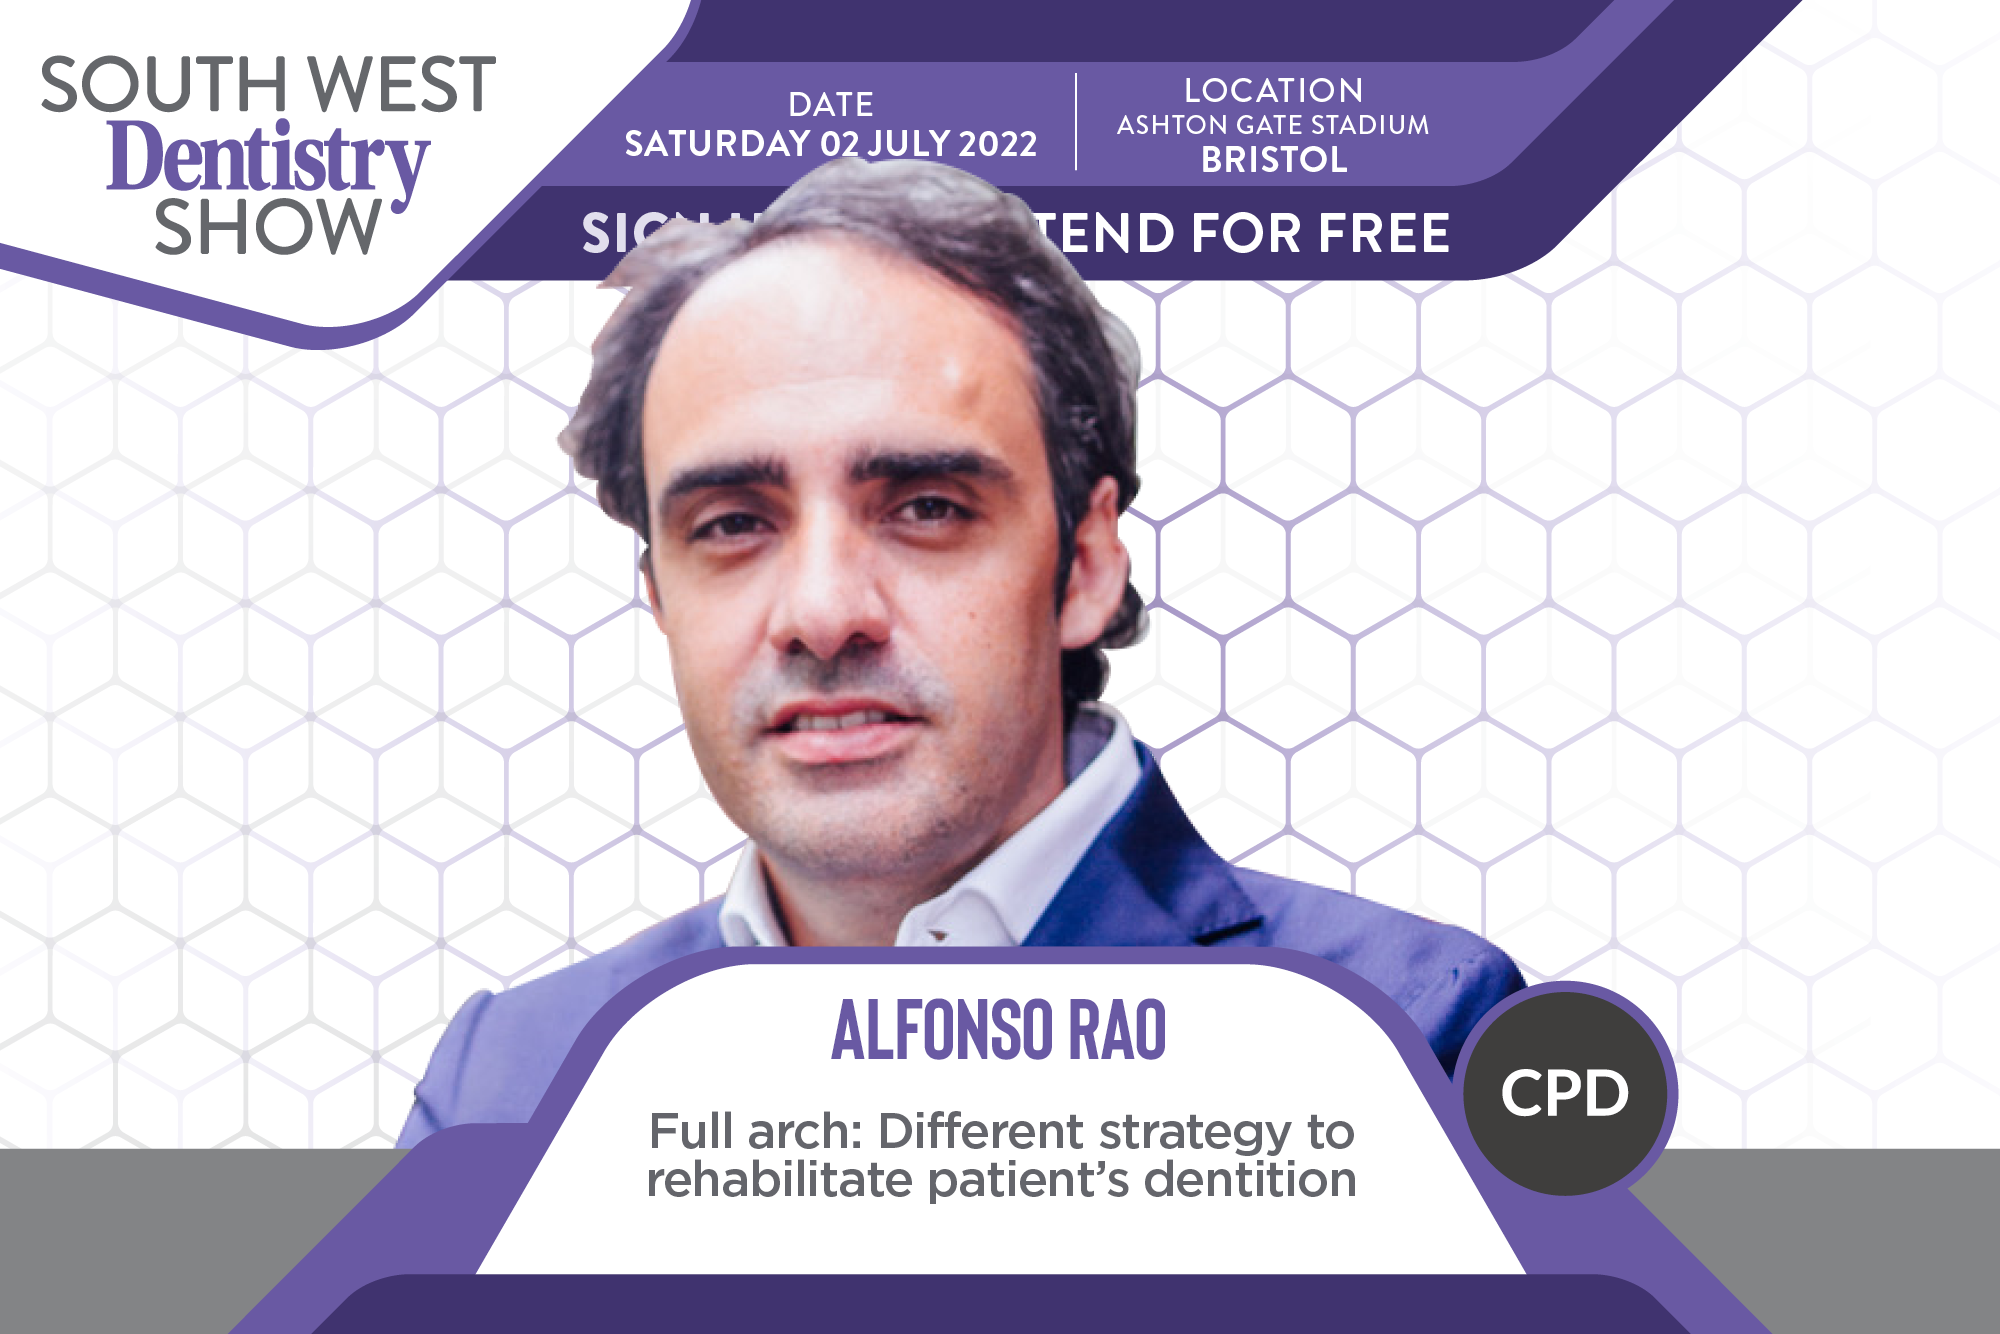 South West Dentistry Show Alfonso Rao